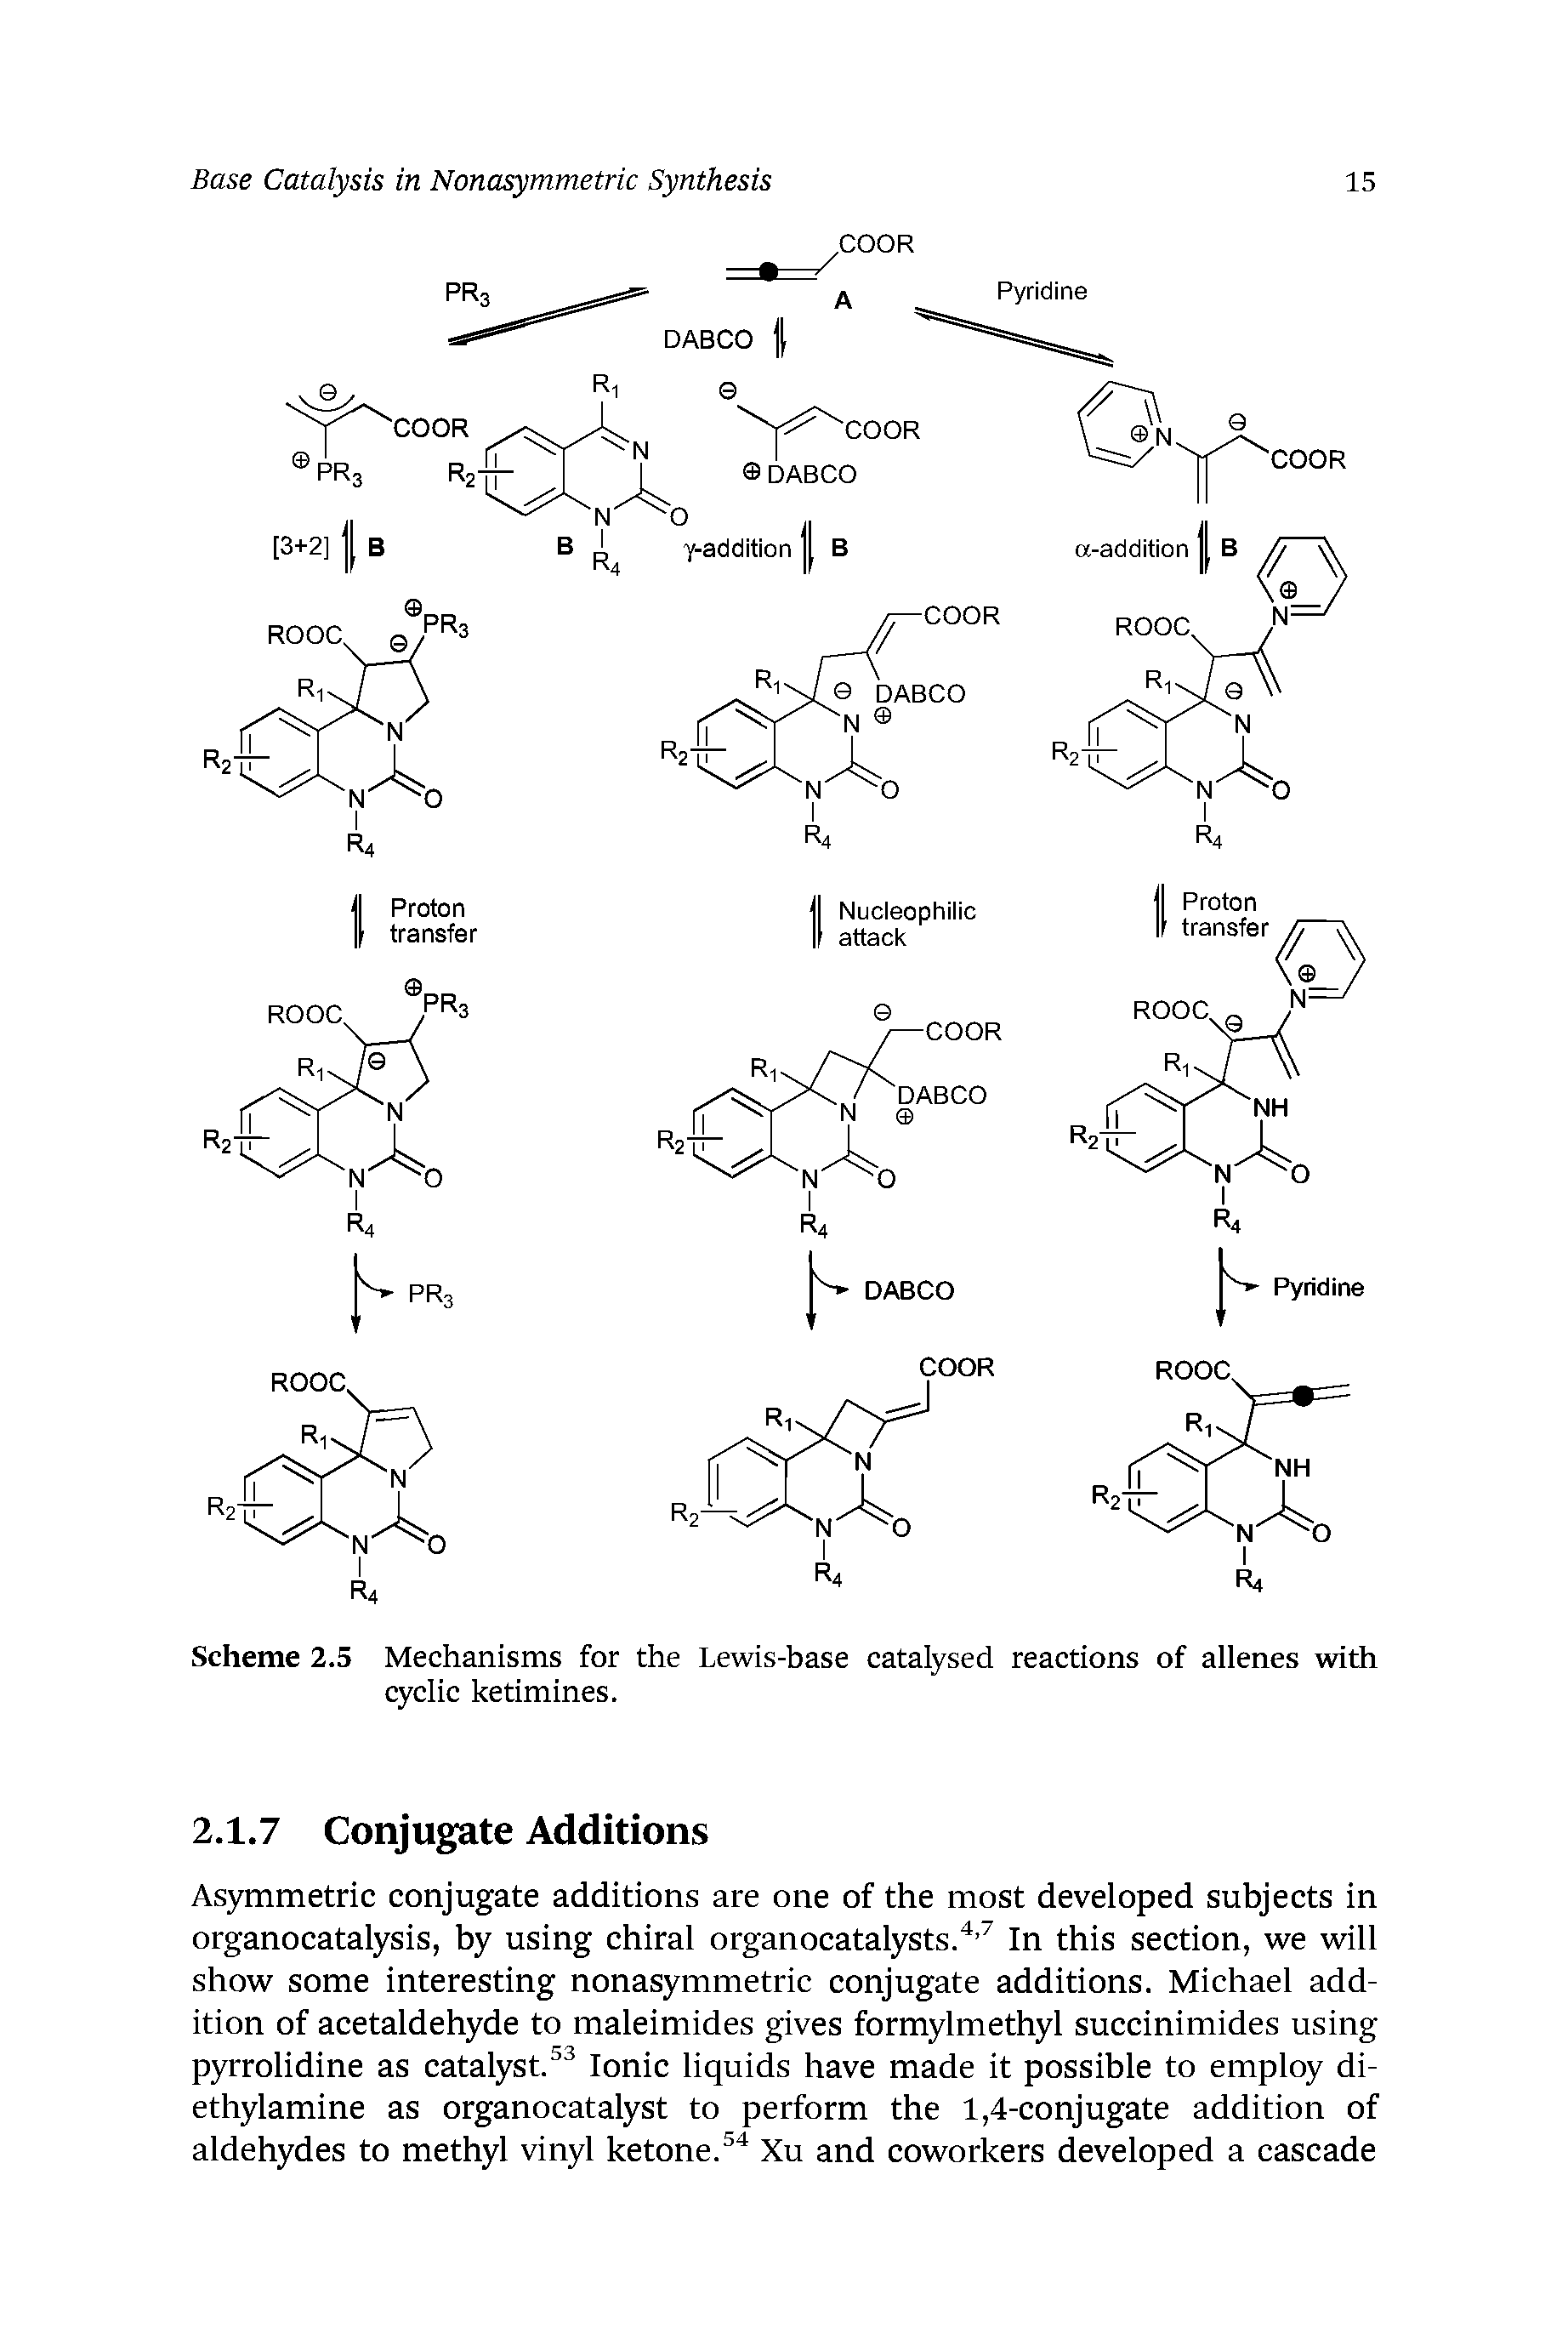 Scheme 2.5 Mechanisms for the Lewis-base catalysed reactions of allenes with cyclic ketimines.